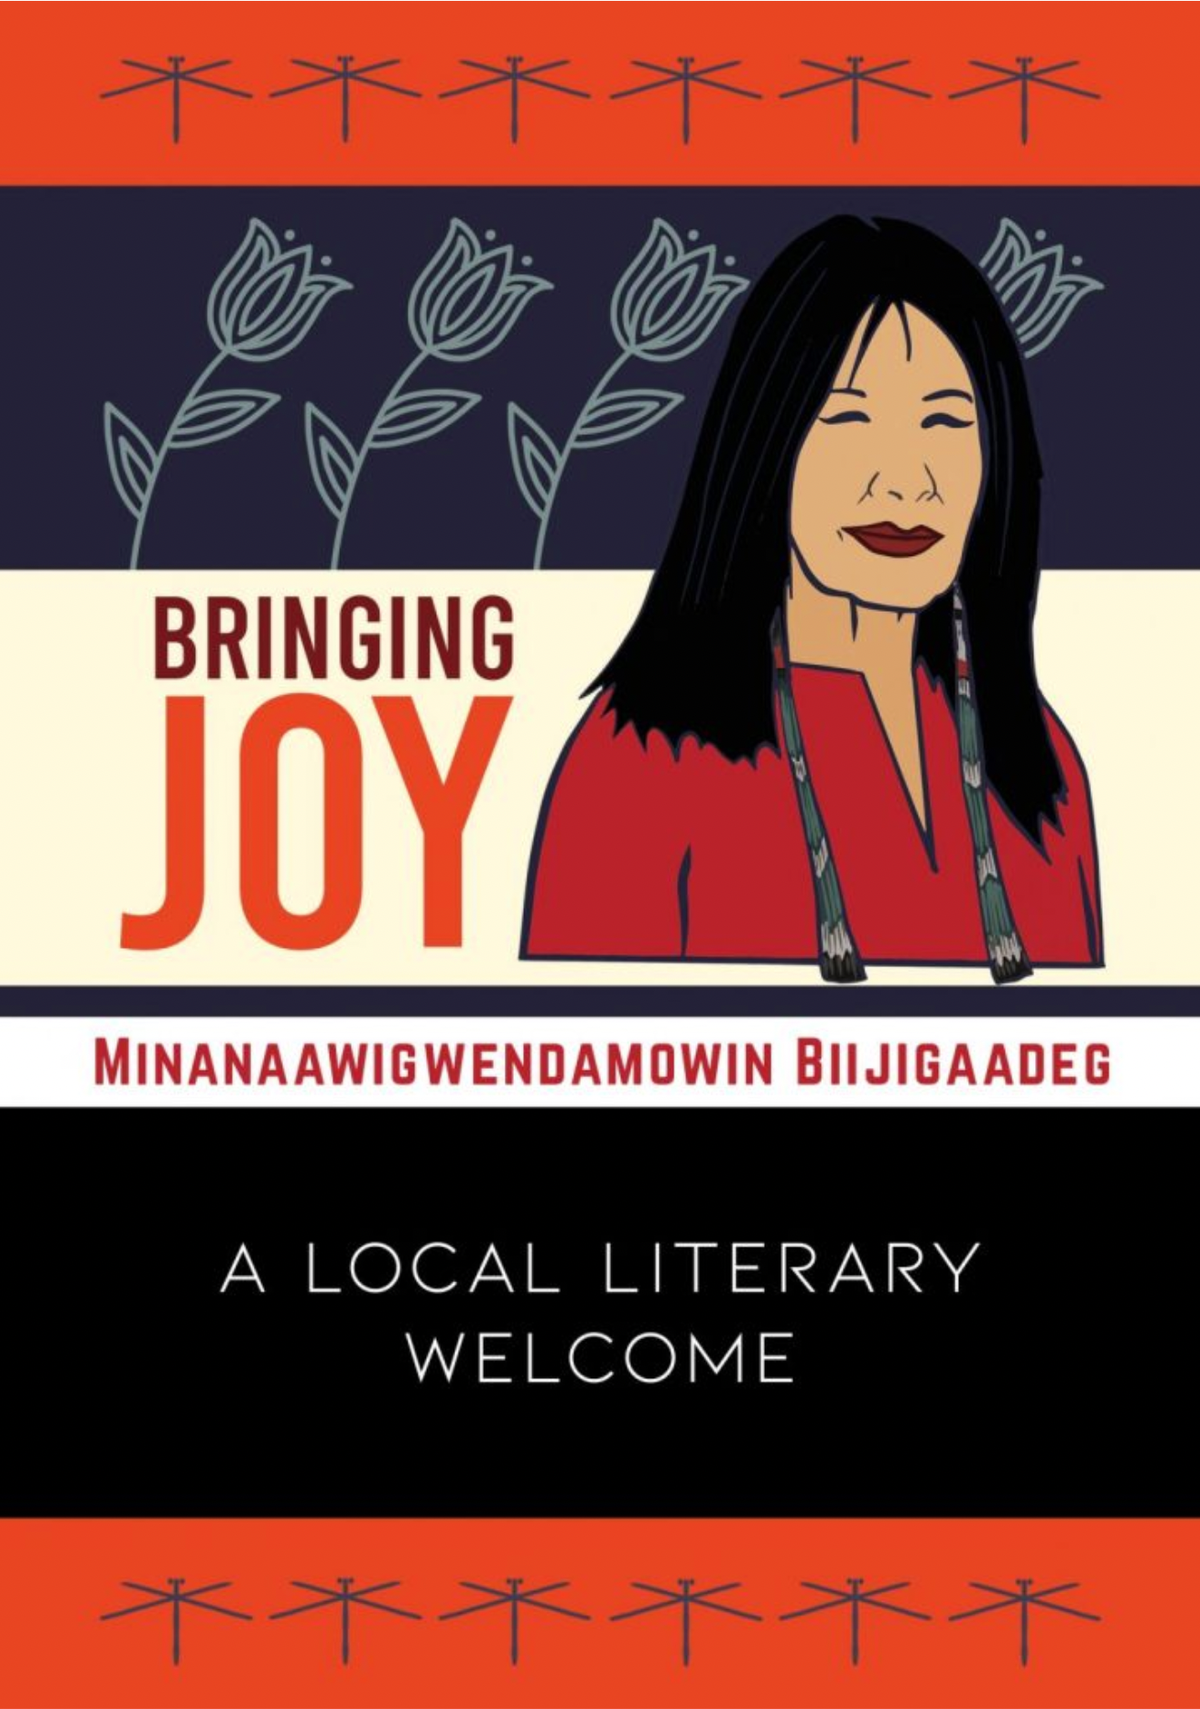 Seeley Mangelsen's new poem in Bringing Joy: A Local Literary Welcome